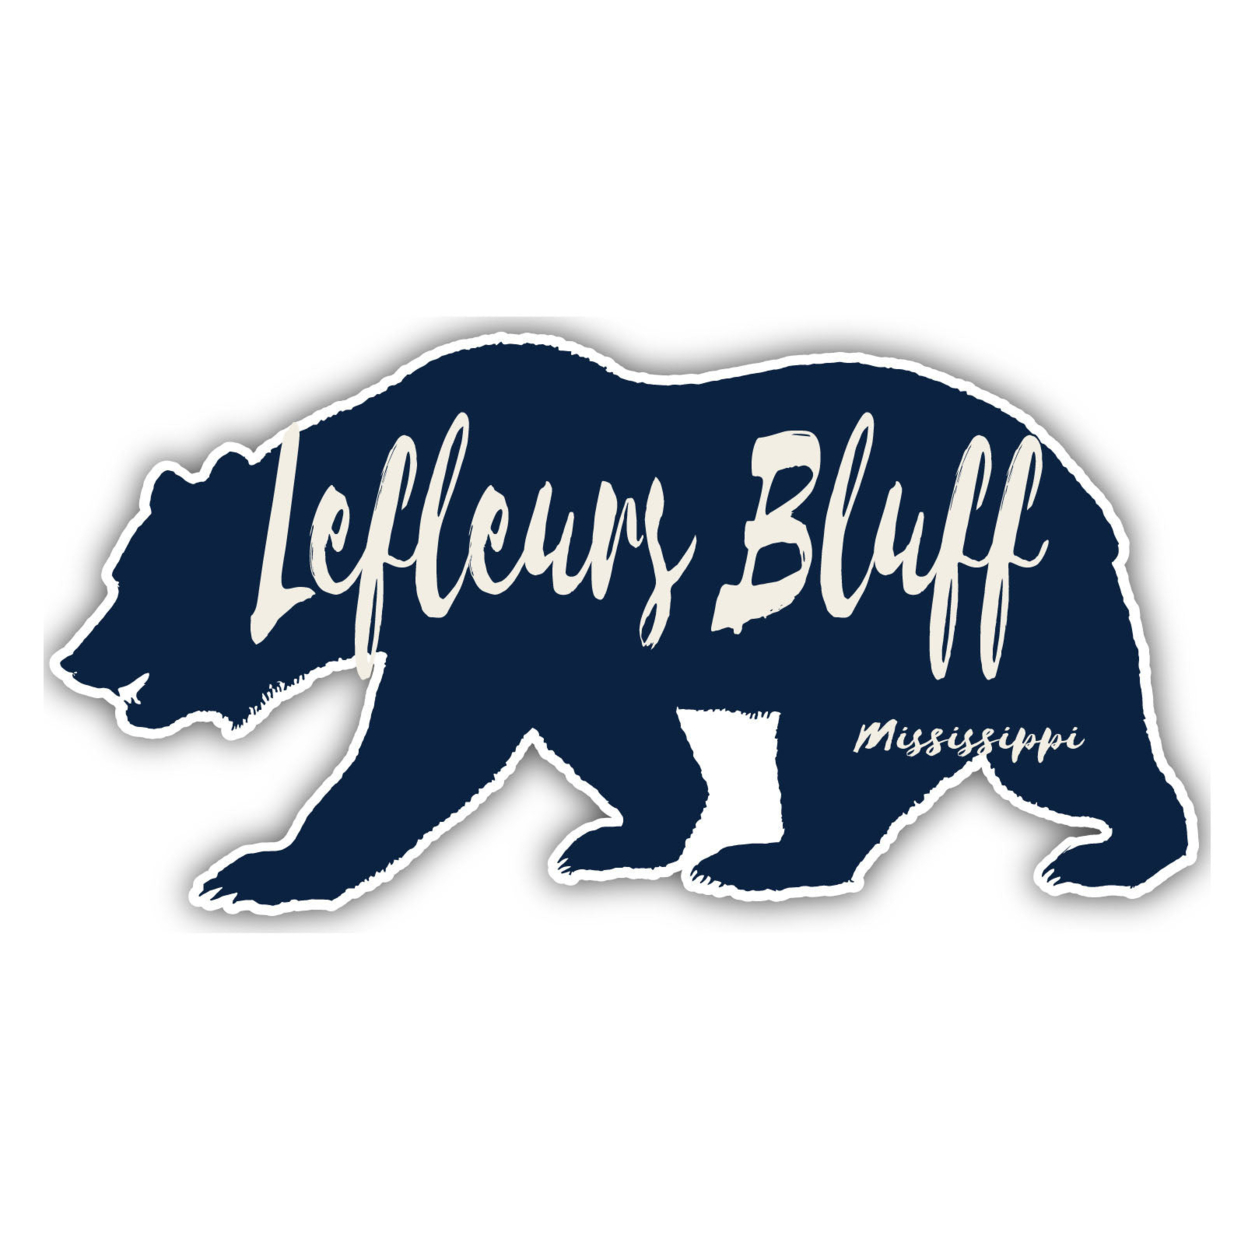 Lefleurs Bluff Mississippi Souvenir Decorative Stickers (Choose Theme And Size) - 4-Inch, Bear